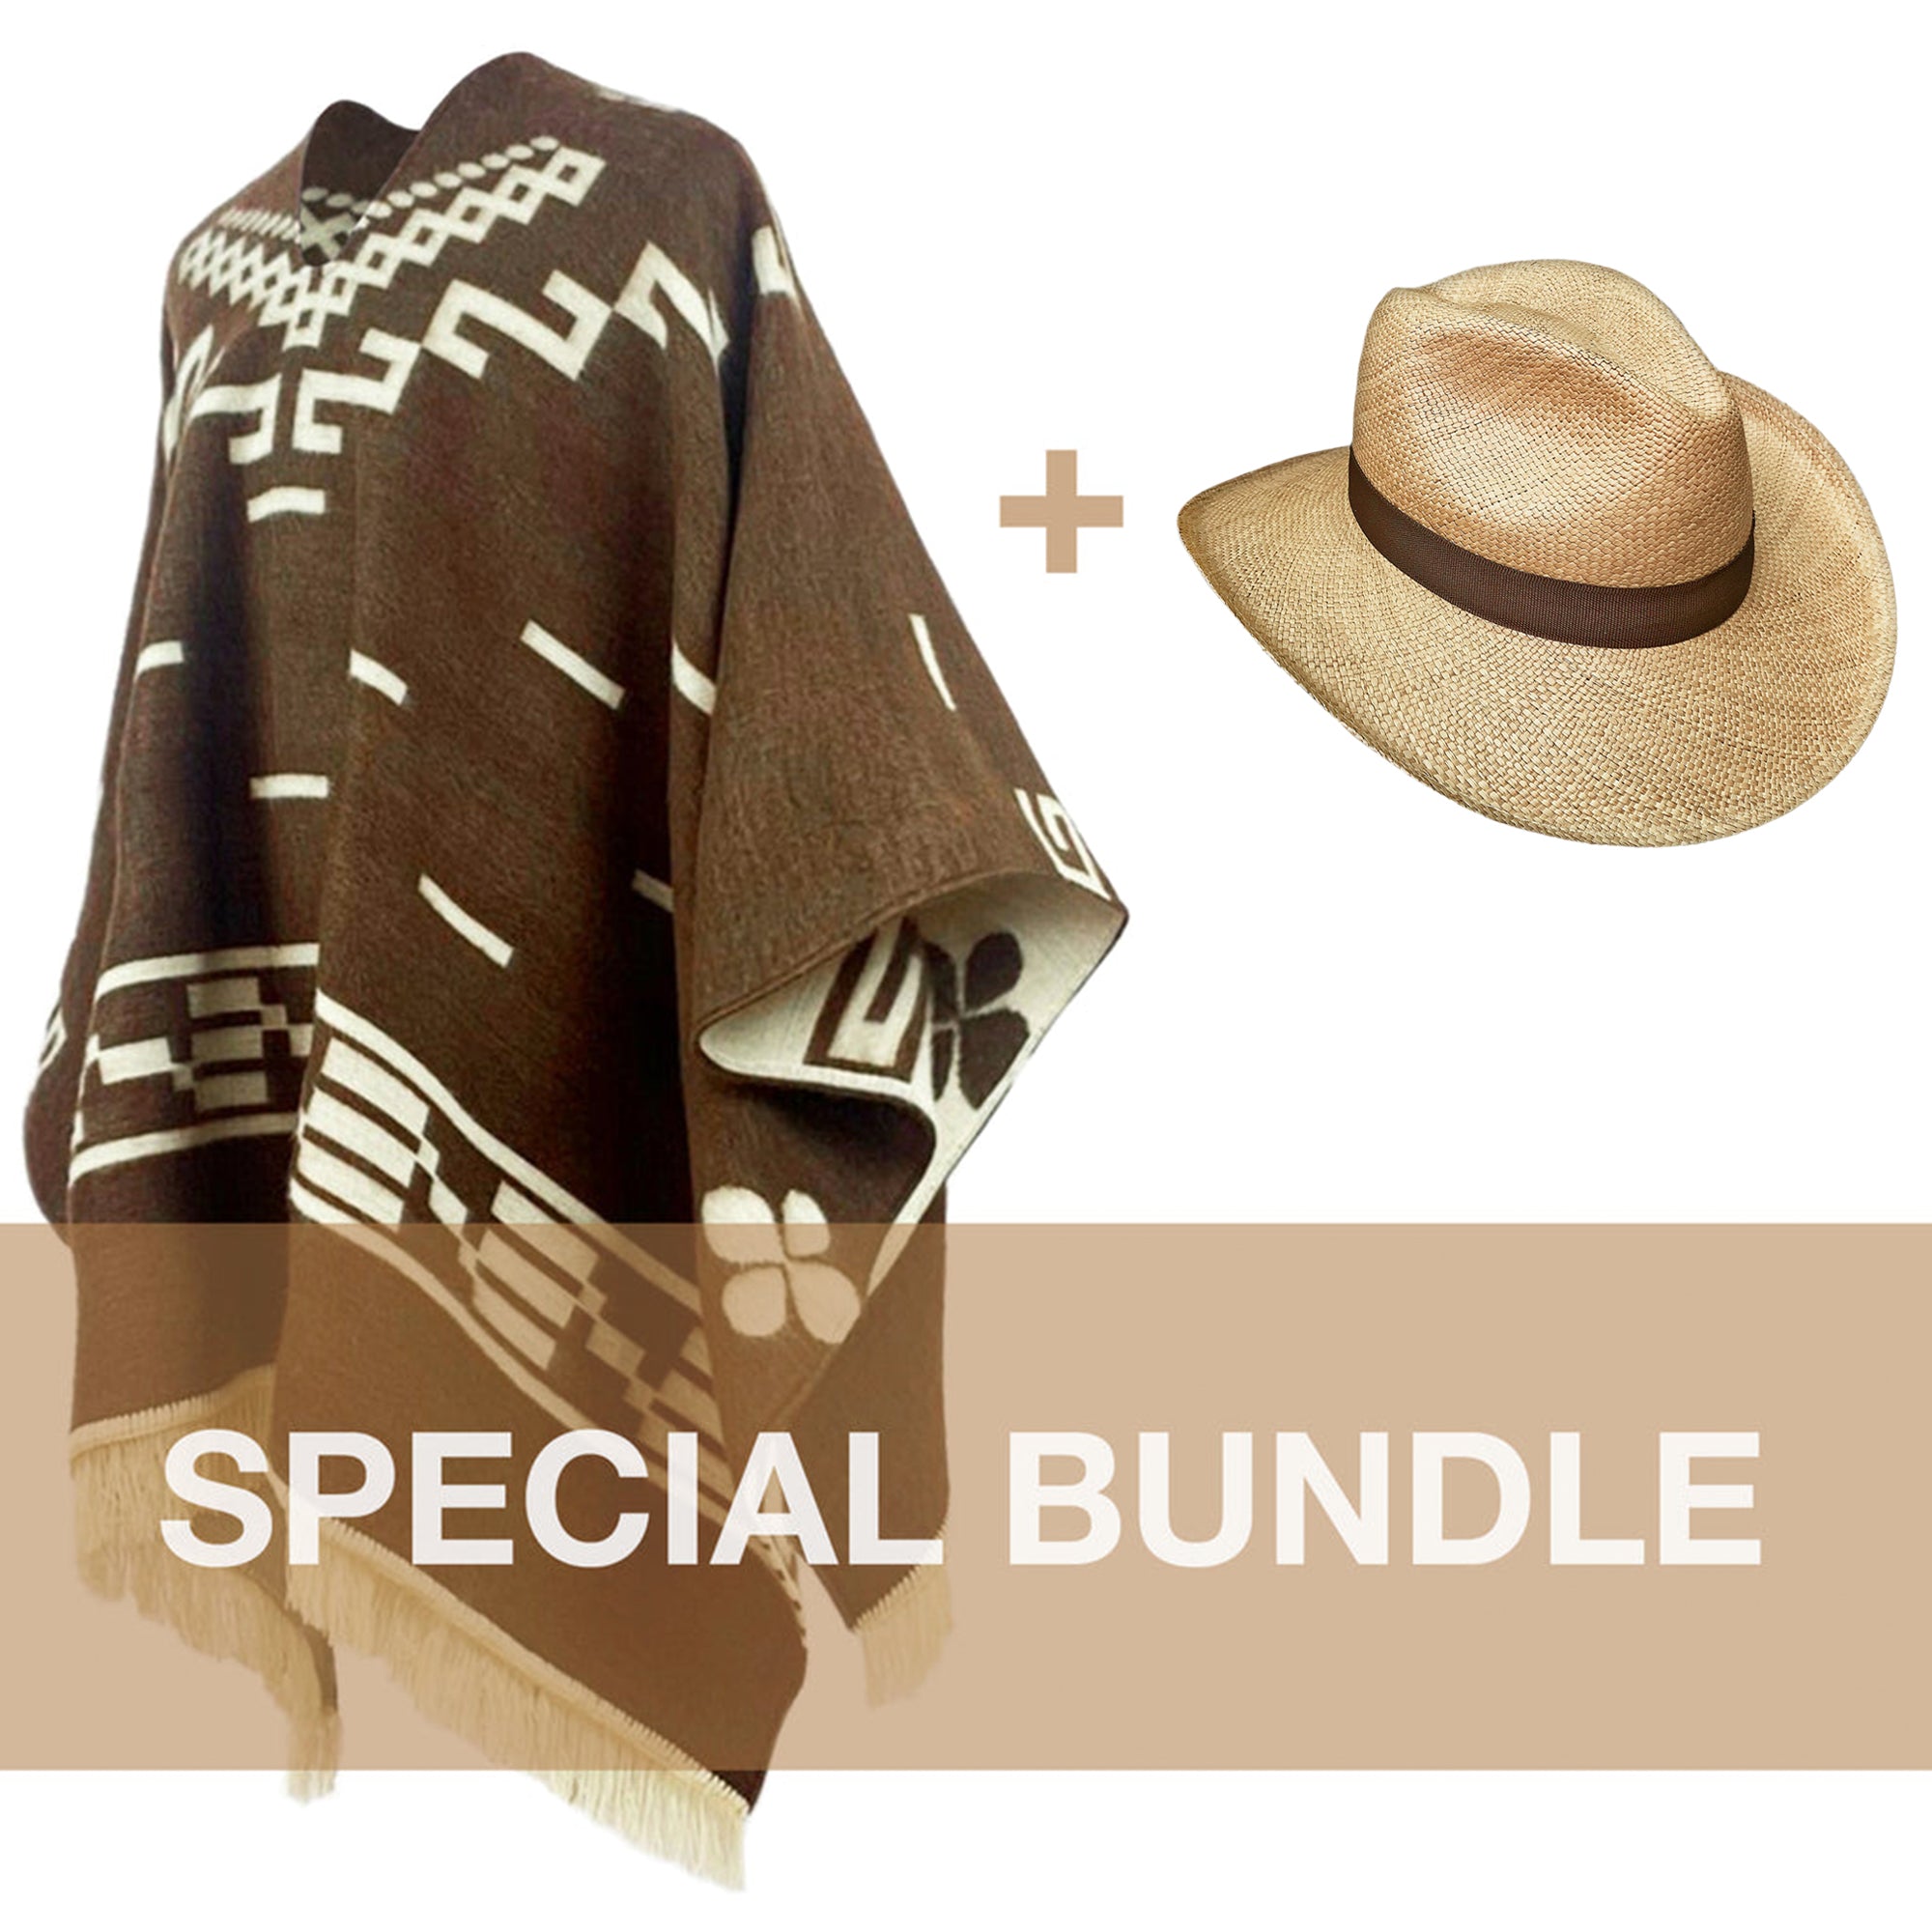 Clint Eastwood Western Cowboy bundle - buy a poncho and a Cowboy Panama hat and SAVE!